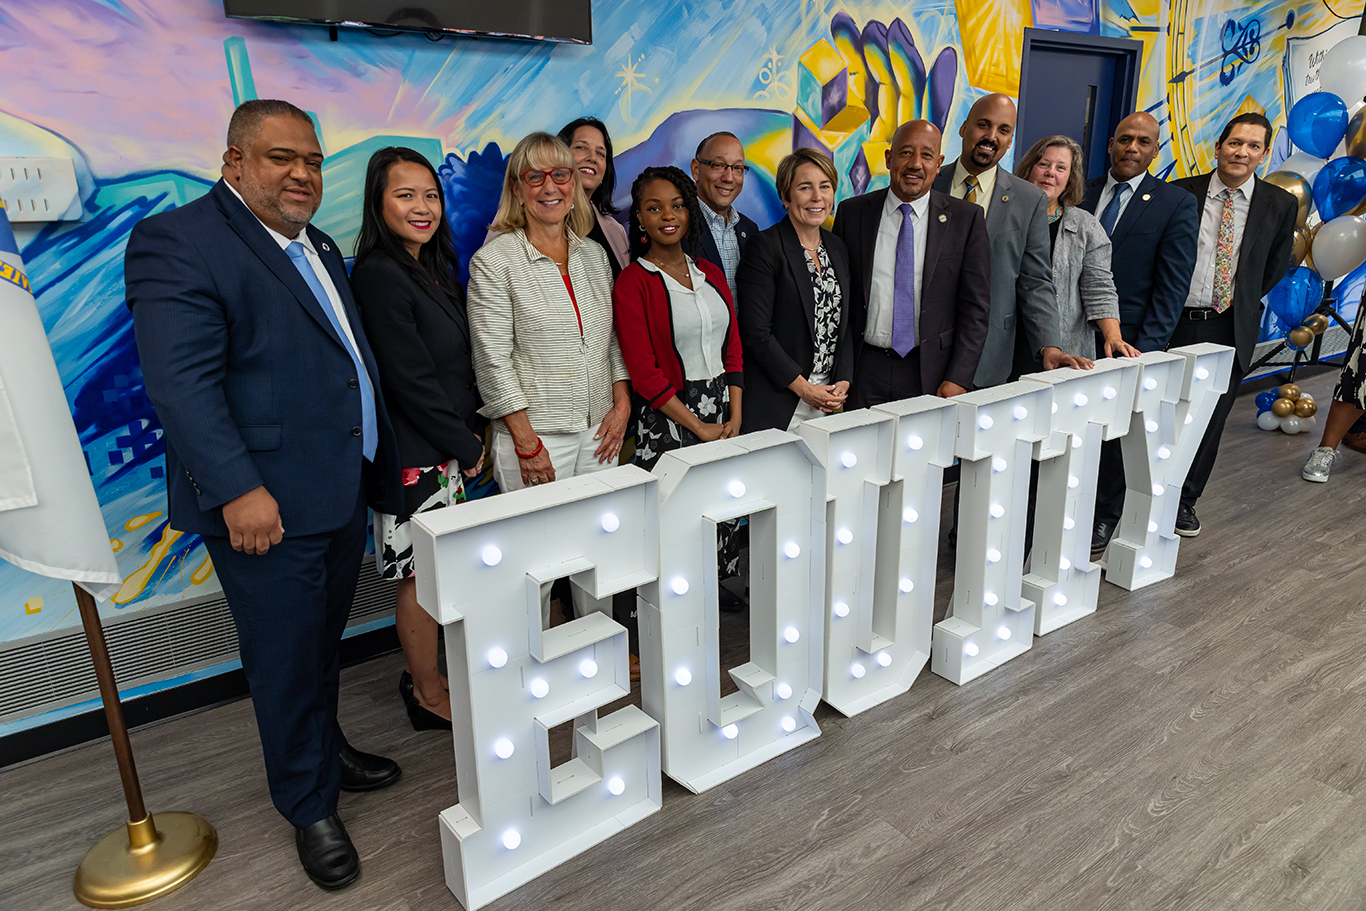 A group of twelve individuals, including Governor Maura Healey, Lt. Governor Kim Driscoll, Senate President Karen Spilka, Secretary of Education Patrick Tutwiler, and Commissioner of Higher Education Noe Ortega, are seen smiling and posing together. They are positioned in front of a vibrant mural and stand behind a large illuminated sign that prominently reads 'EQUITY.'